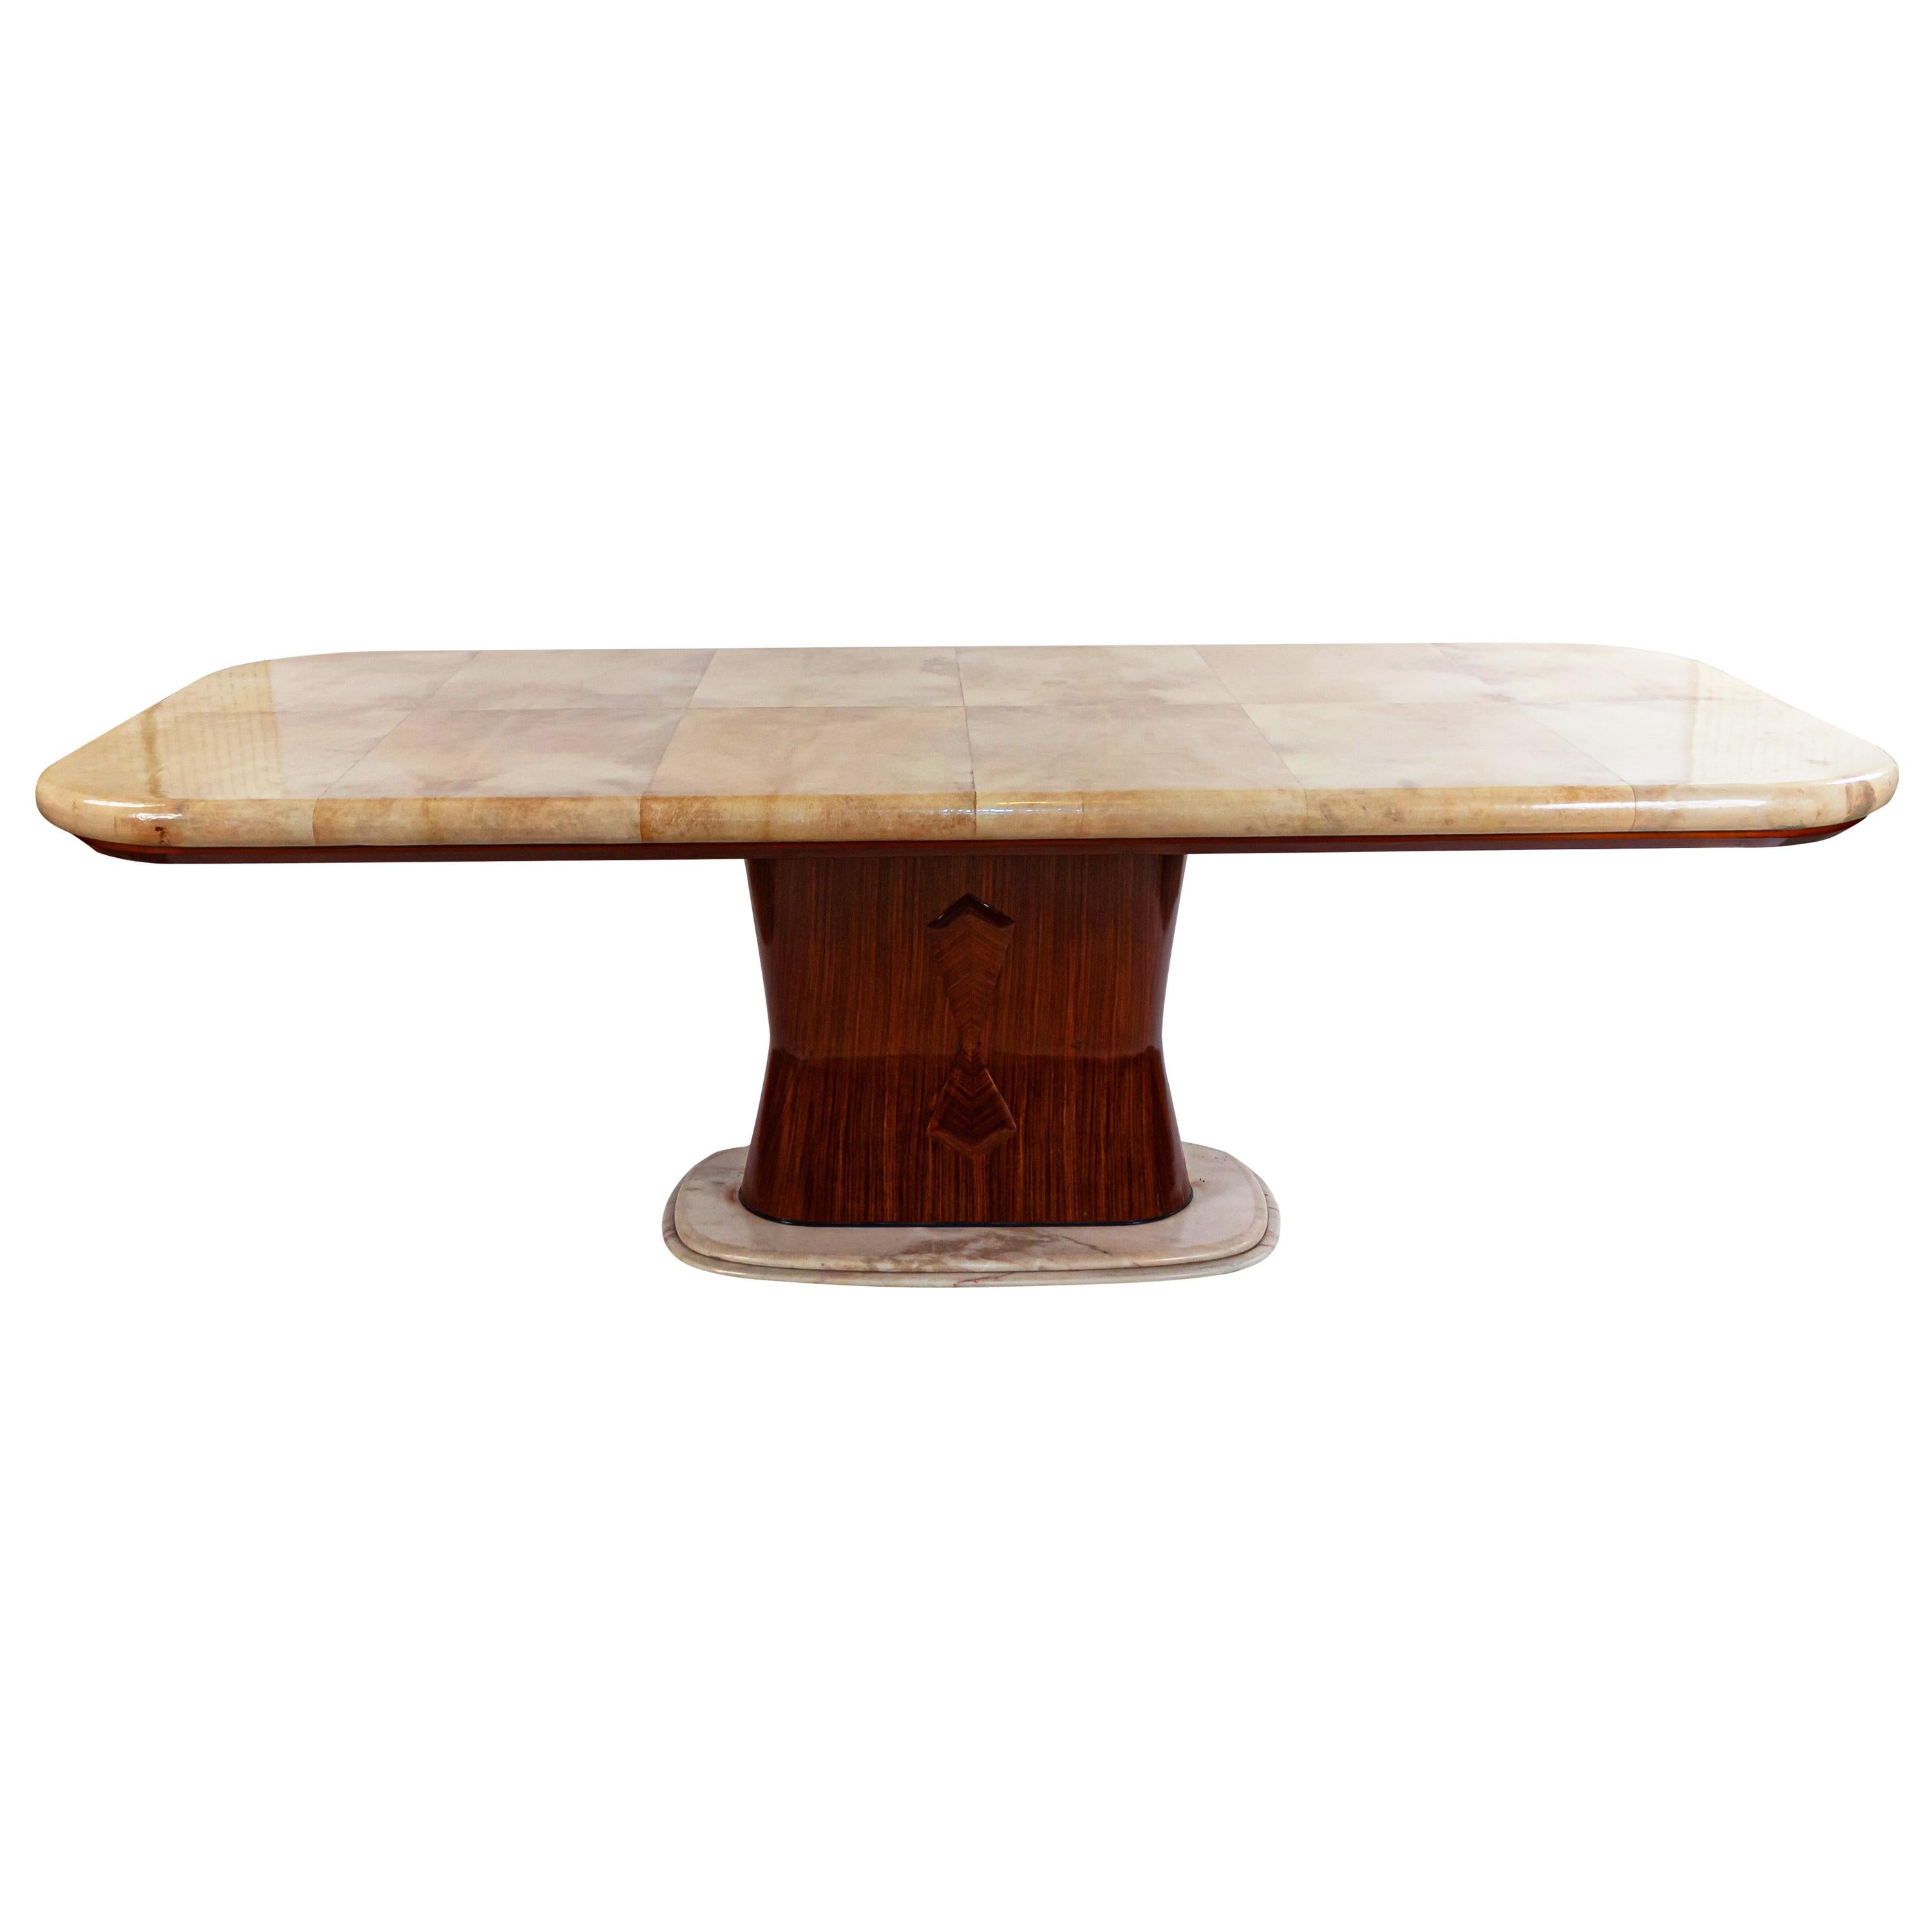 Vittorio Dassi Italian Midcentury Parchment and Rosewood Dining Table For Sale